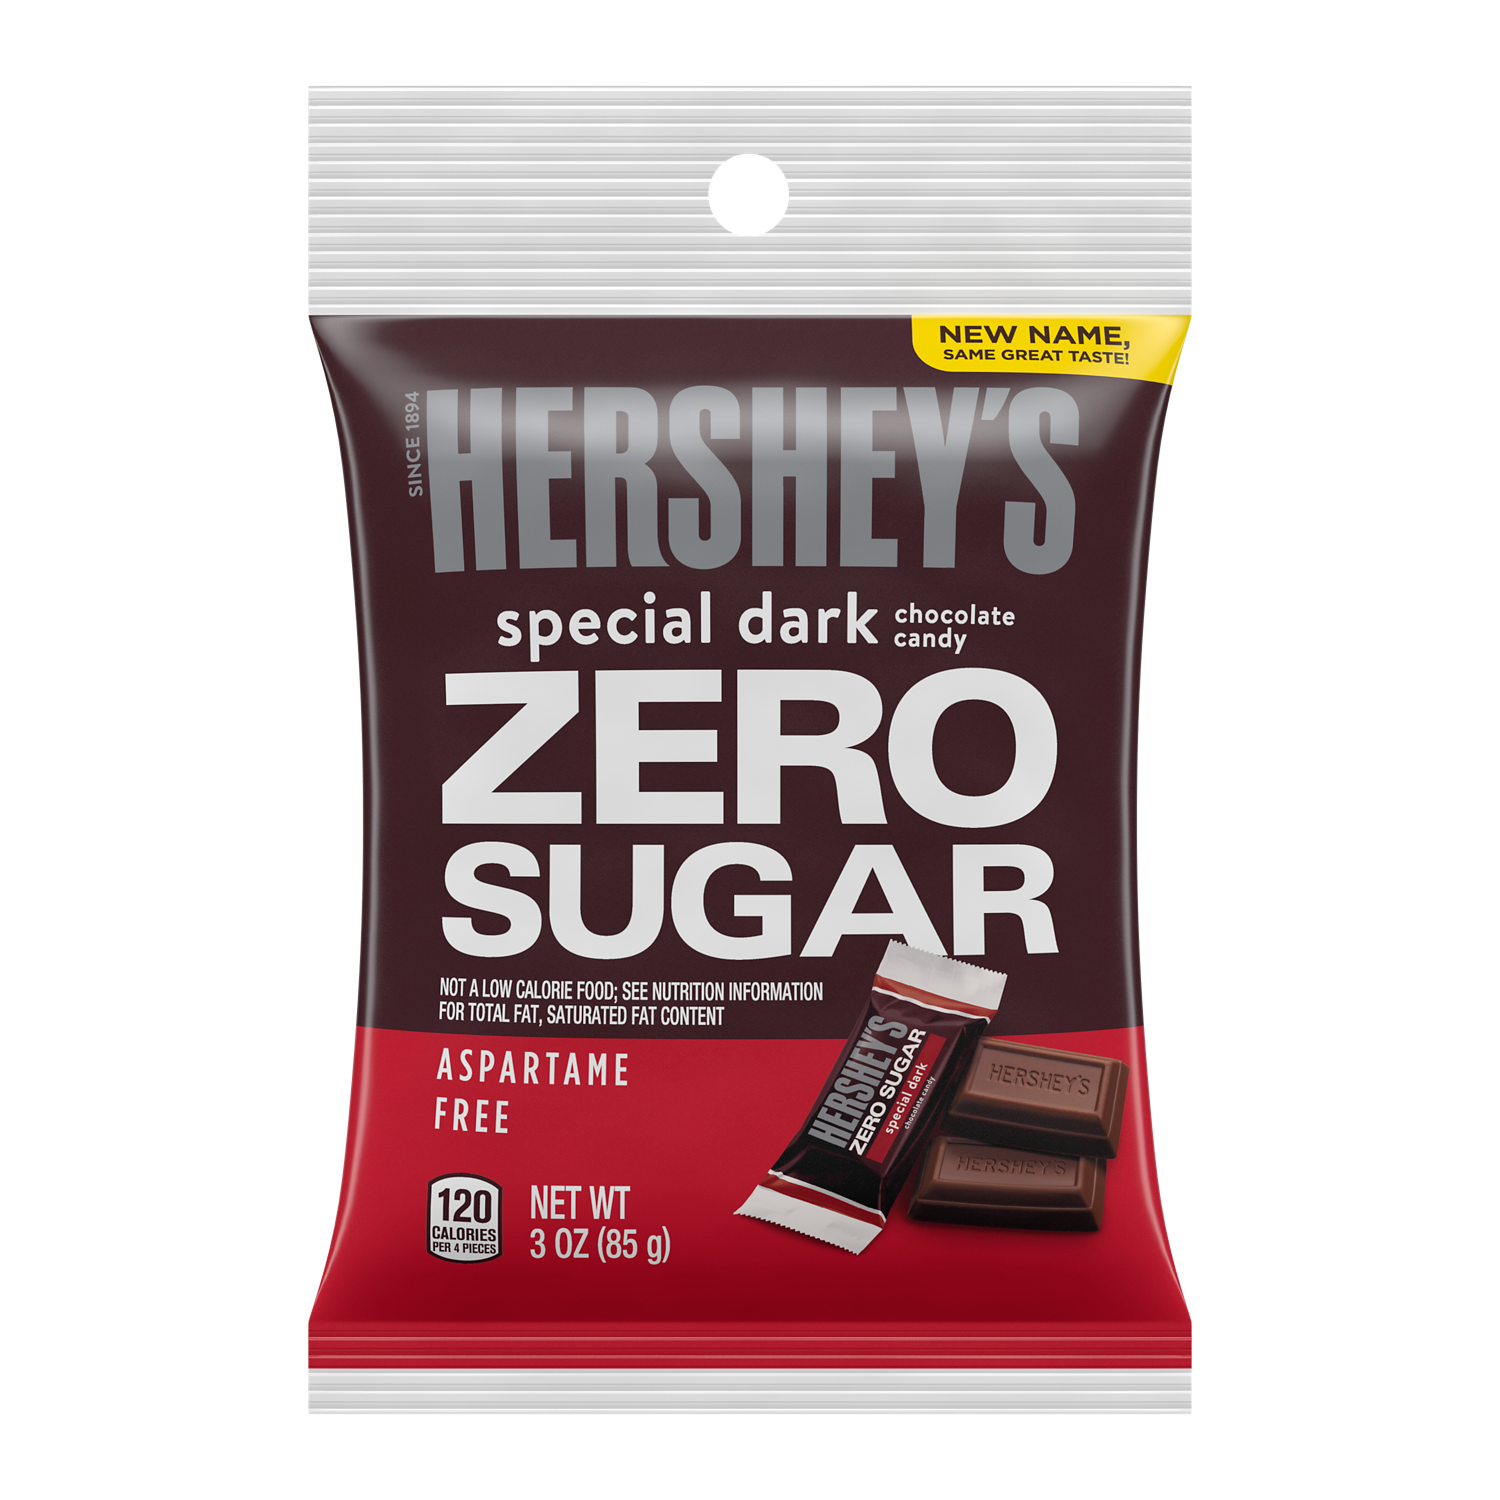 HERSHEY'S SPECIAL DARK Zero Sugar Chocolate Candy Bar, 3 oz bag - Front of Package